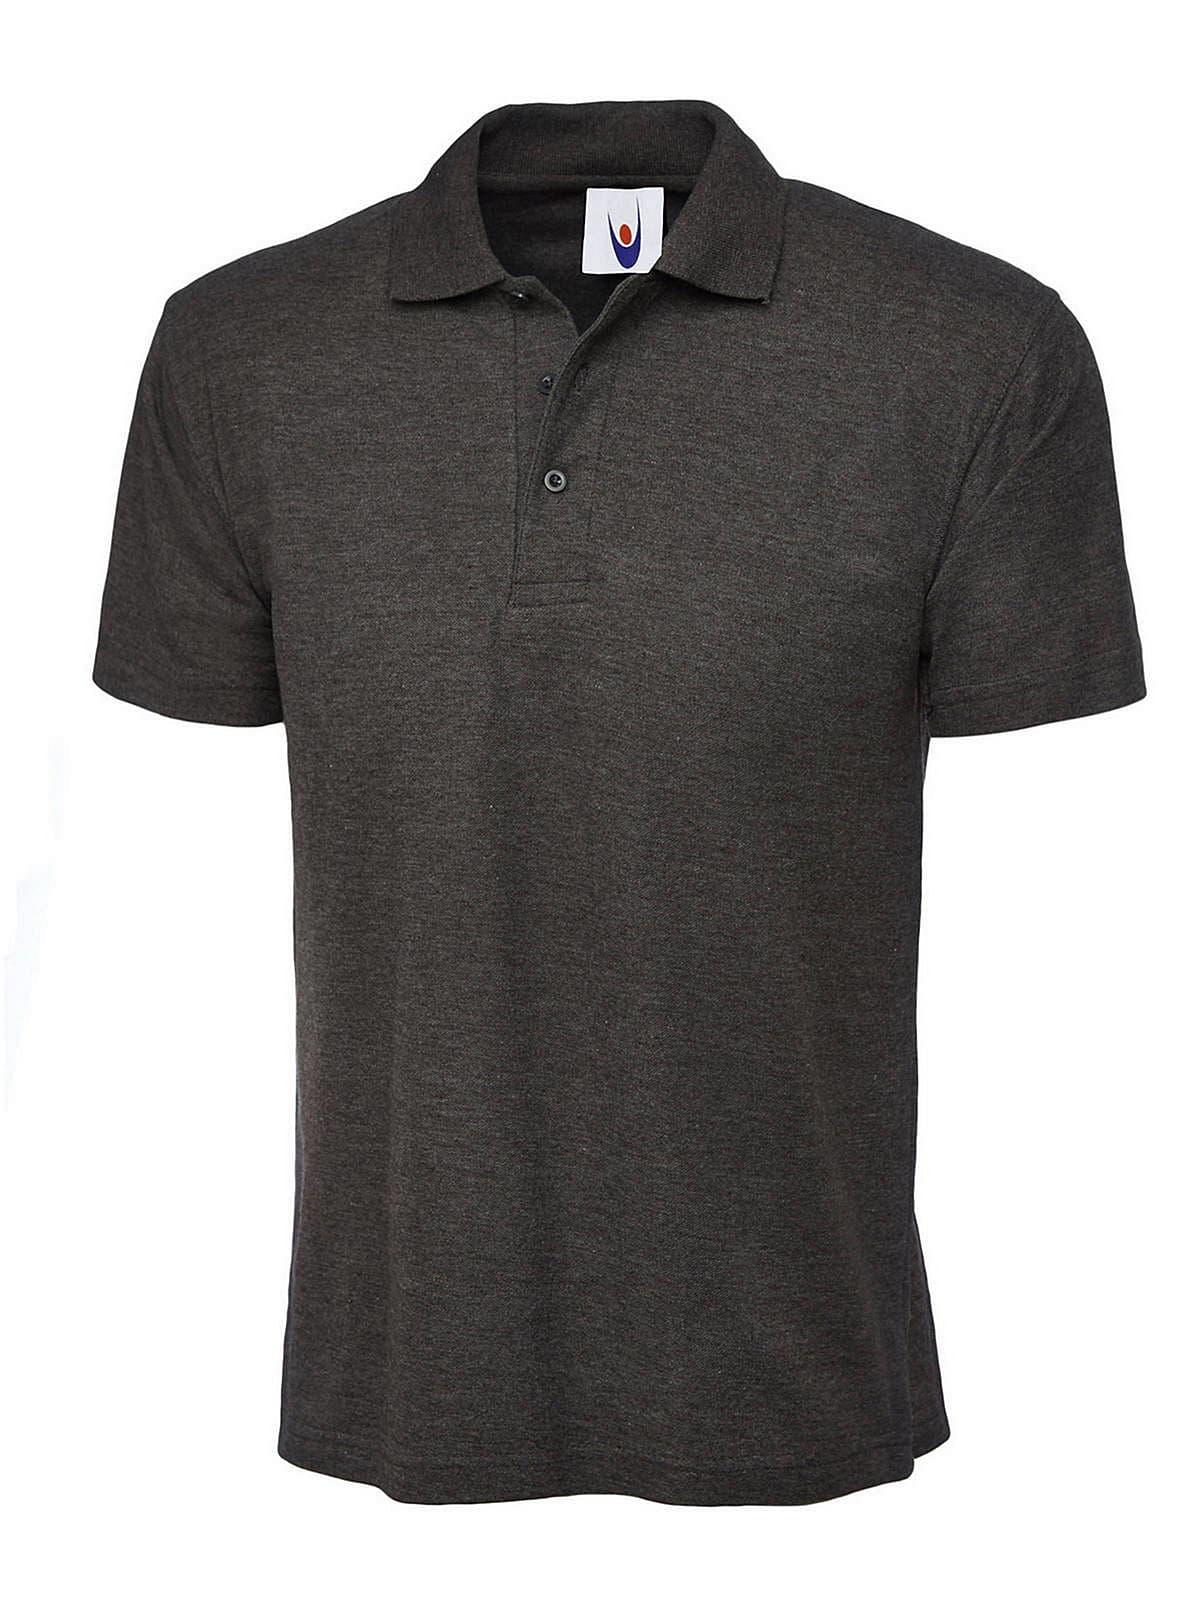 Uneek 220GSM Classic Polo Shirt in Charcoal (Product Code: UC101)